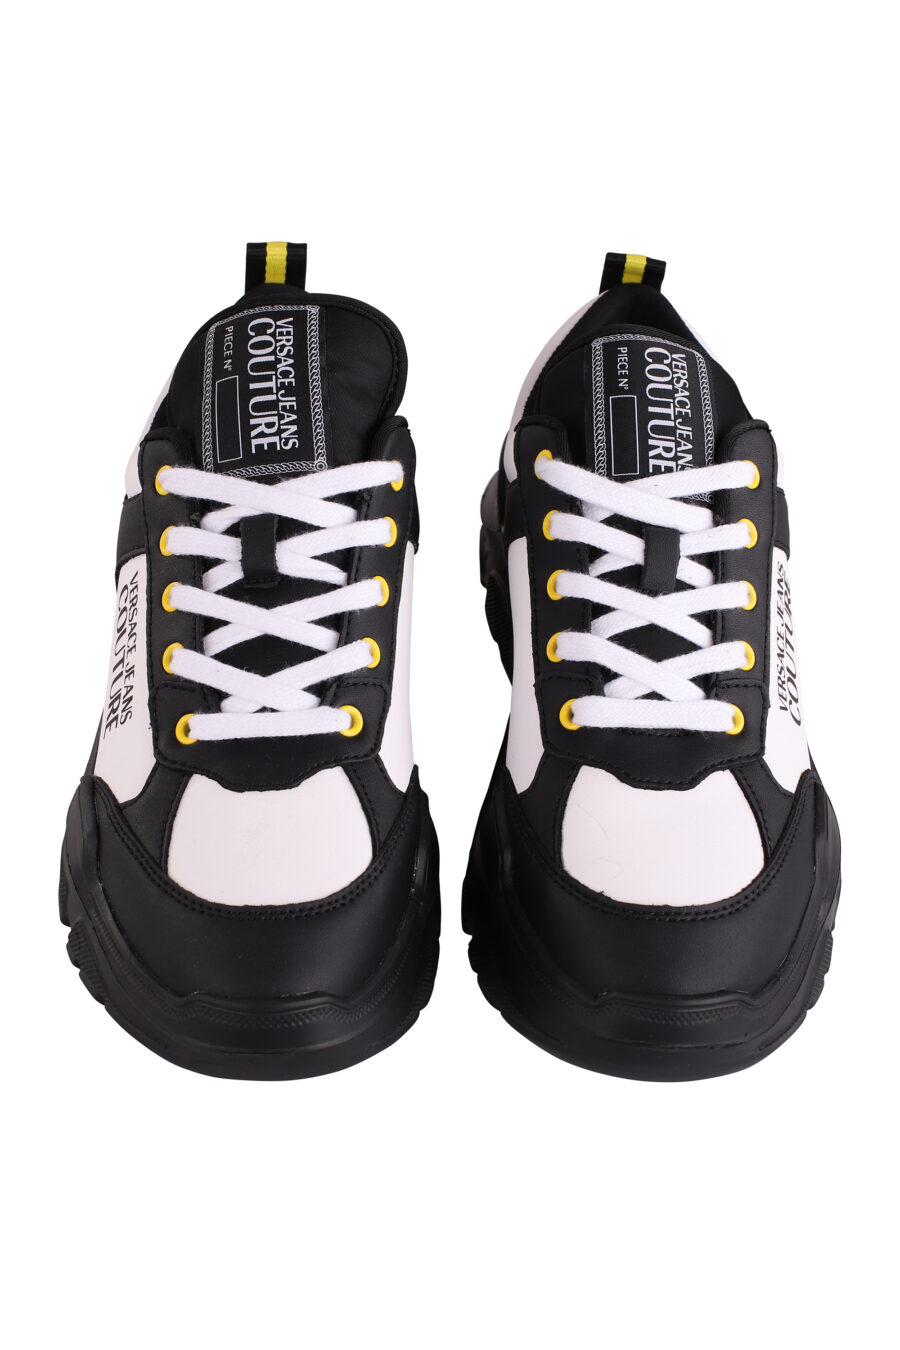 Black and white bicolour trainers with logo and yellow detail - IMG 9115